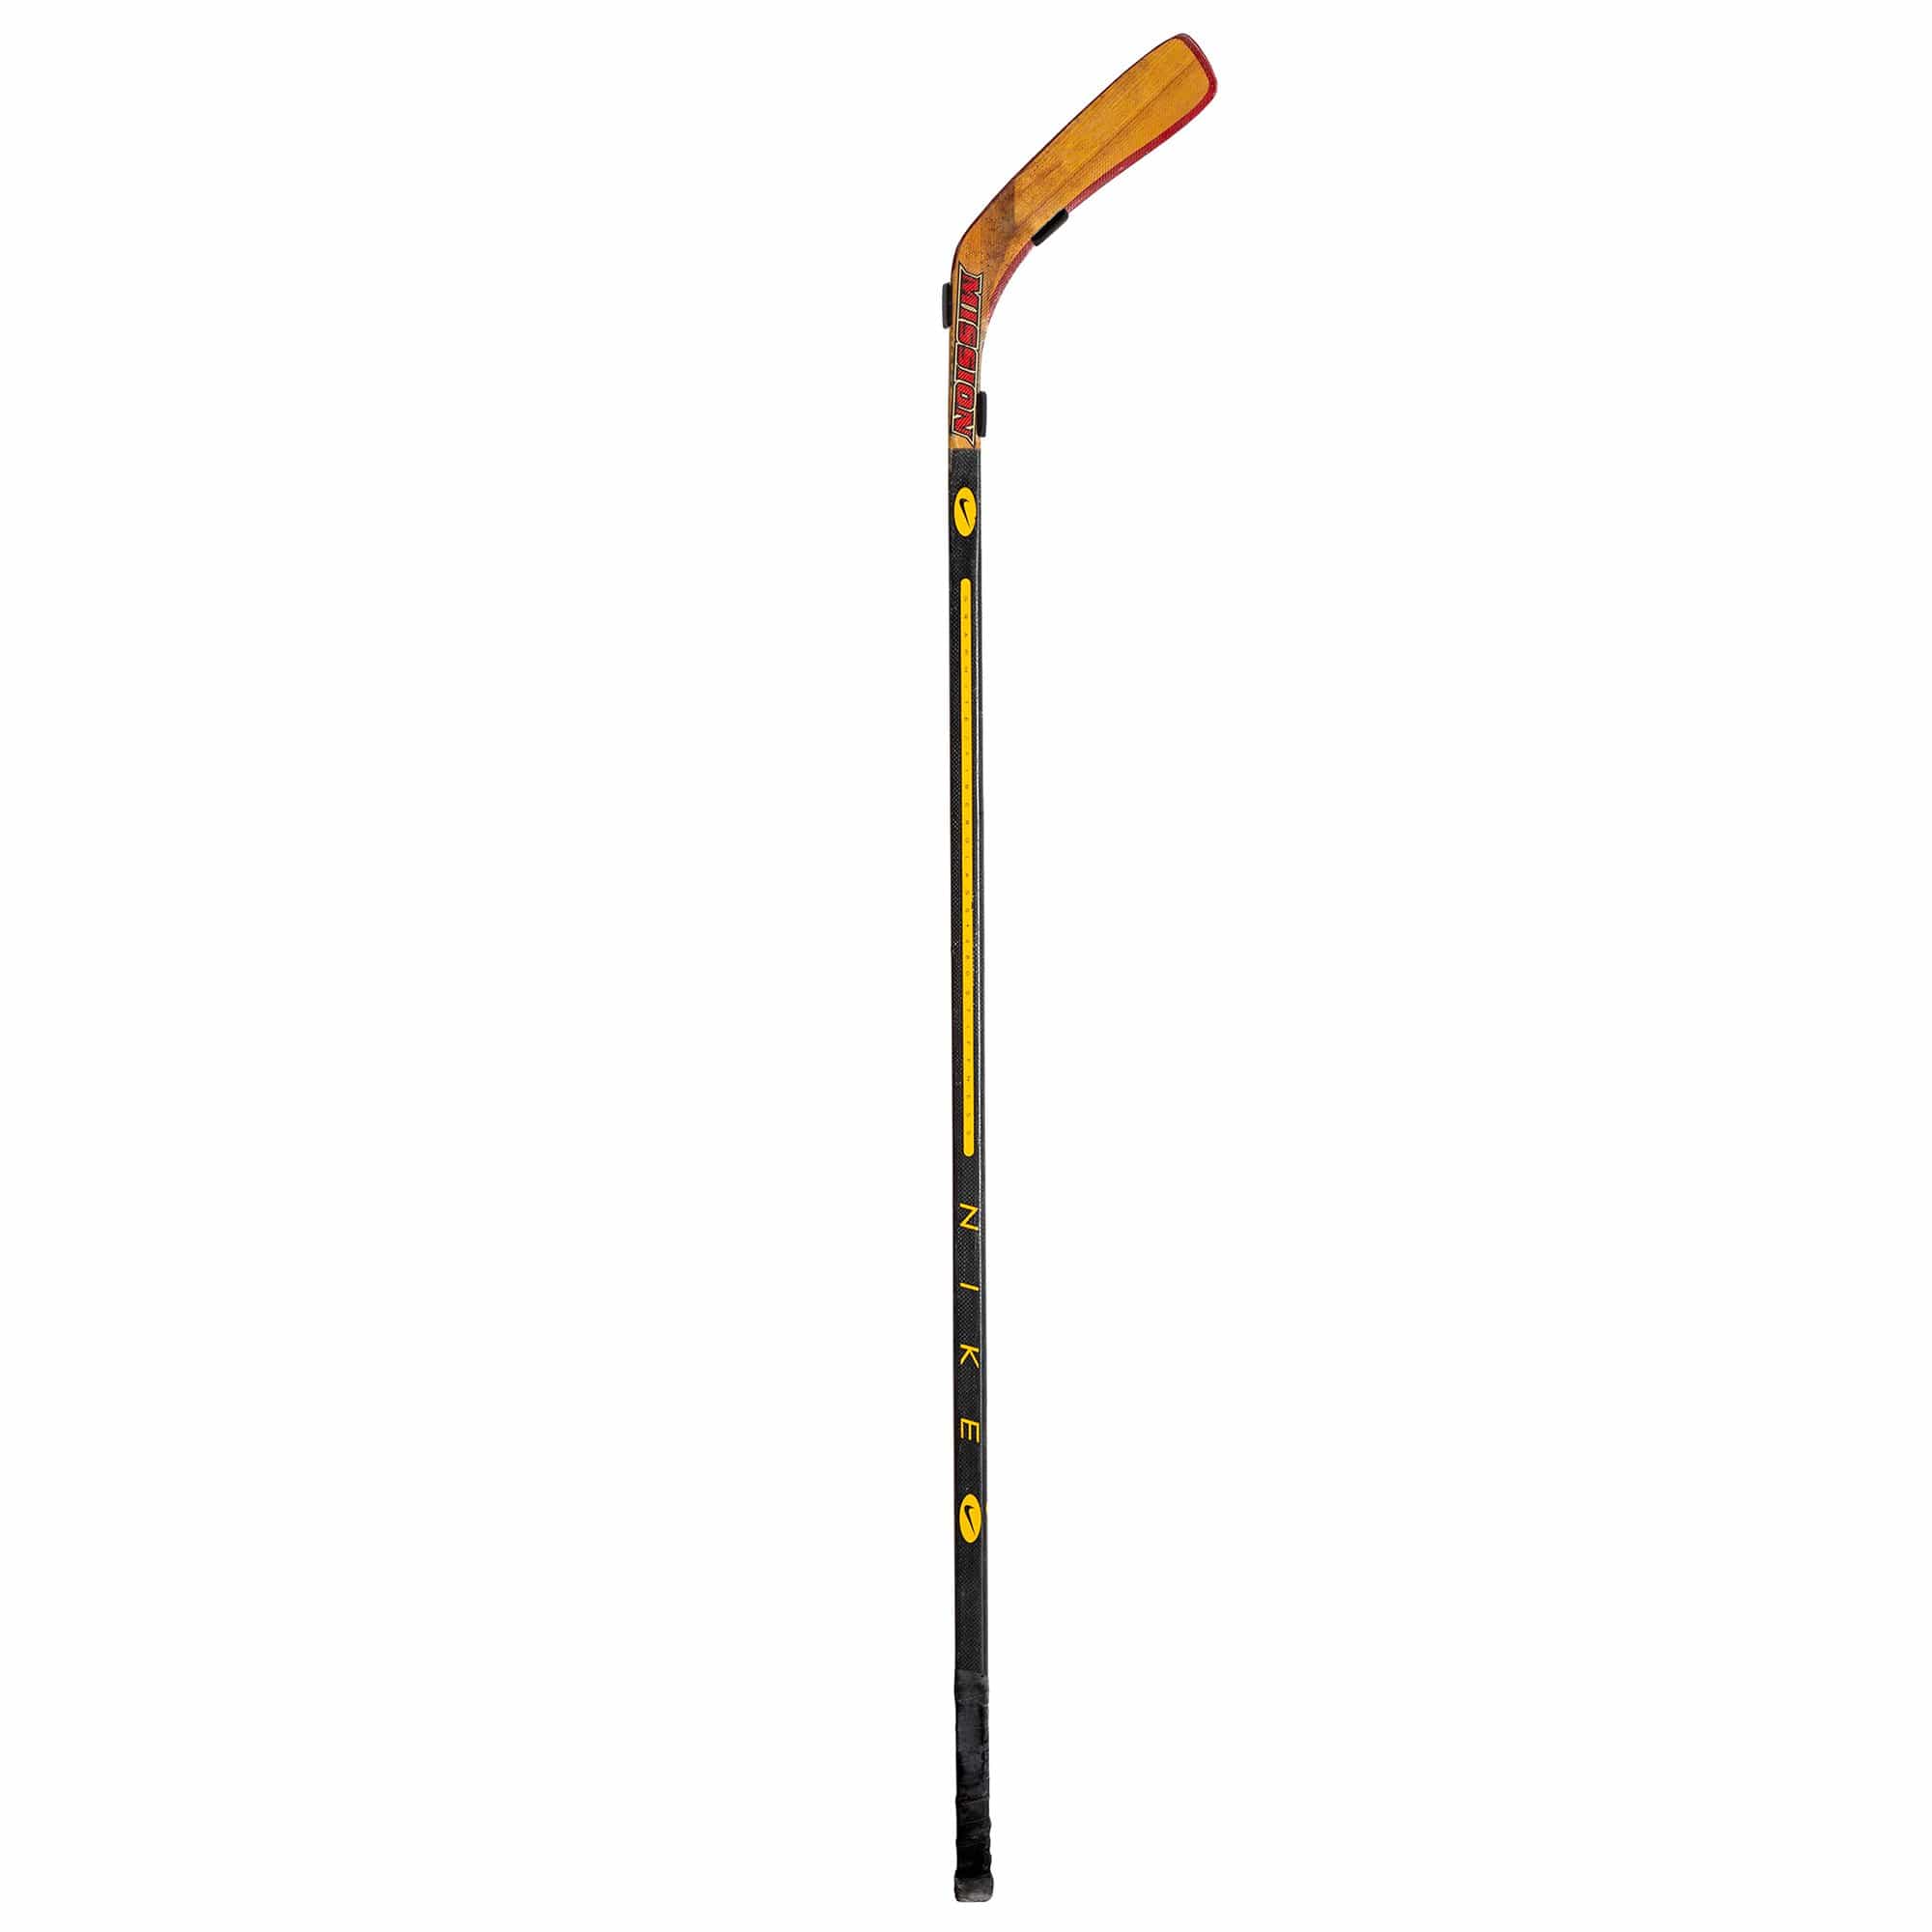 Bauer hockey stick shown mounted in a HIDEit Vertical Hockey Stick Mount. Designed for adult hockey sticks and youth hockey sticks.